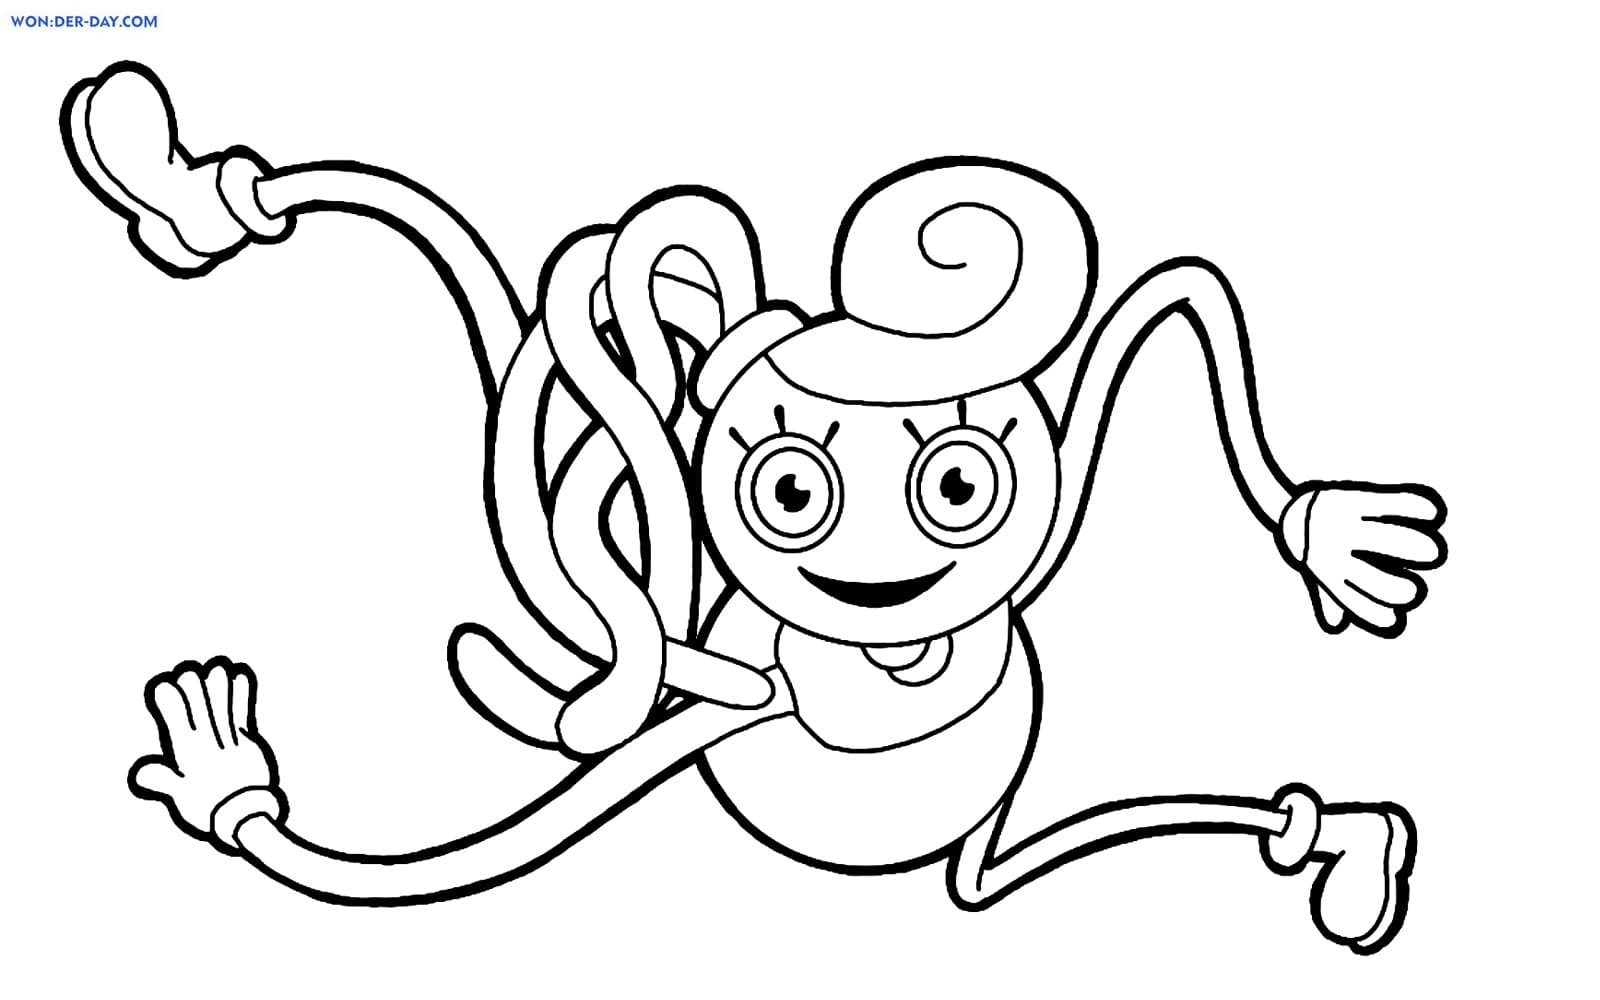 Poppy Playtime coloring pages. Free coloring pages